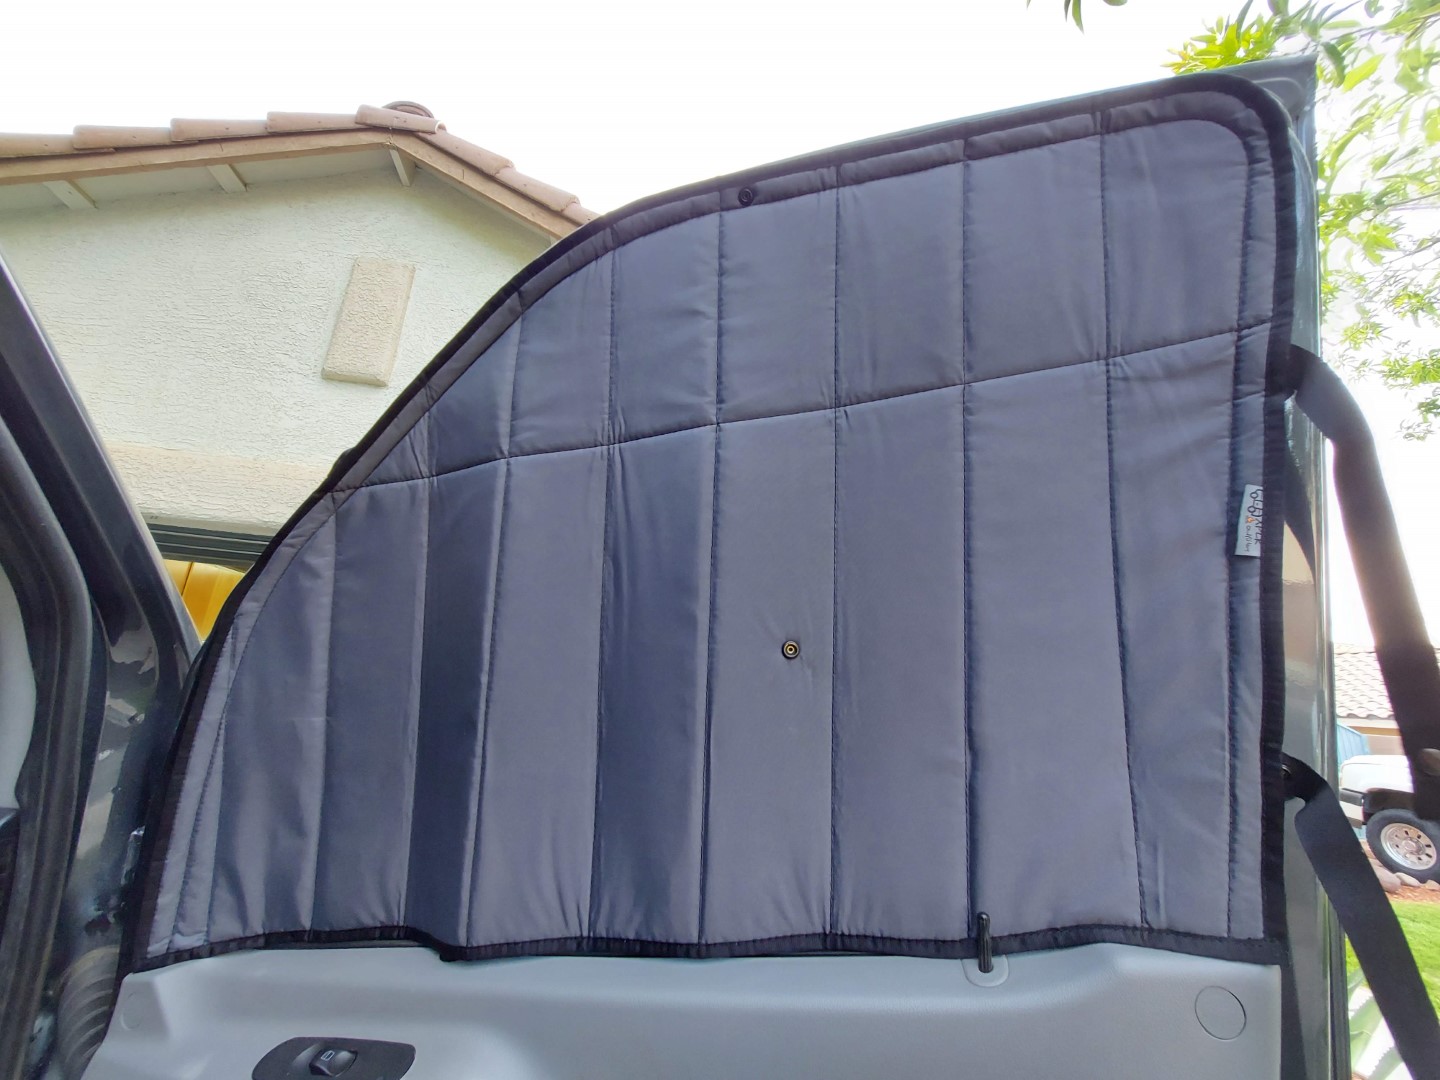 Xplr Outfitters Sprinter Van Window Covers Review